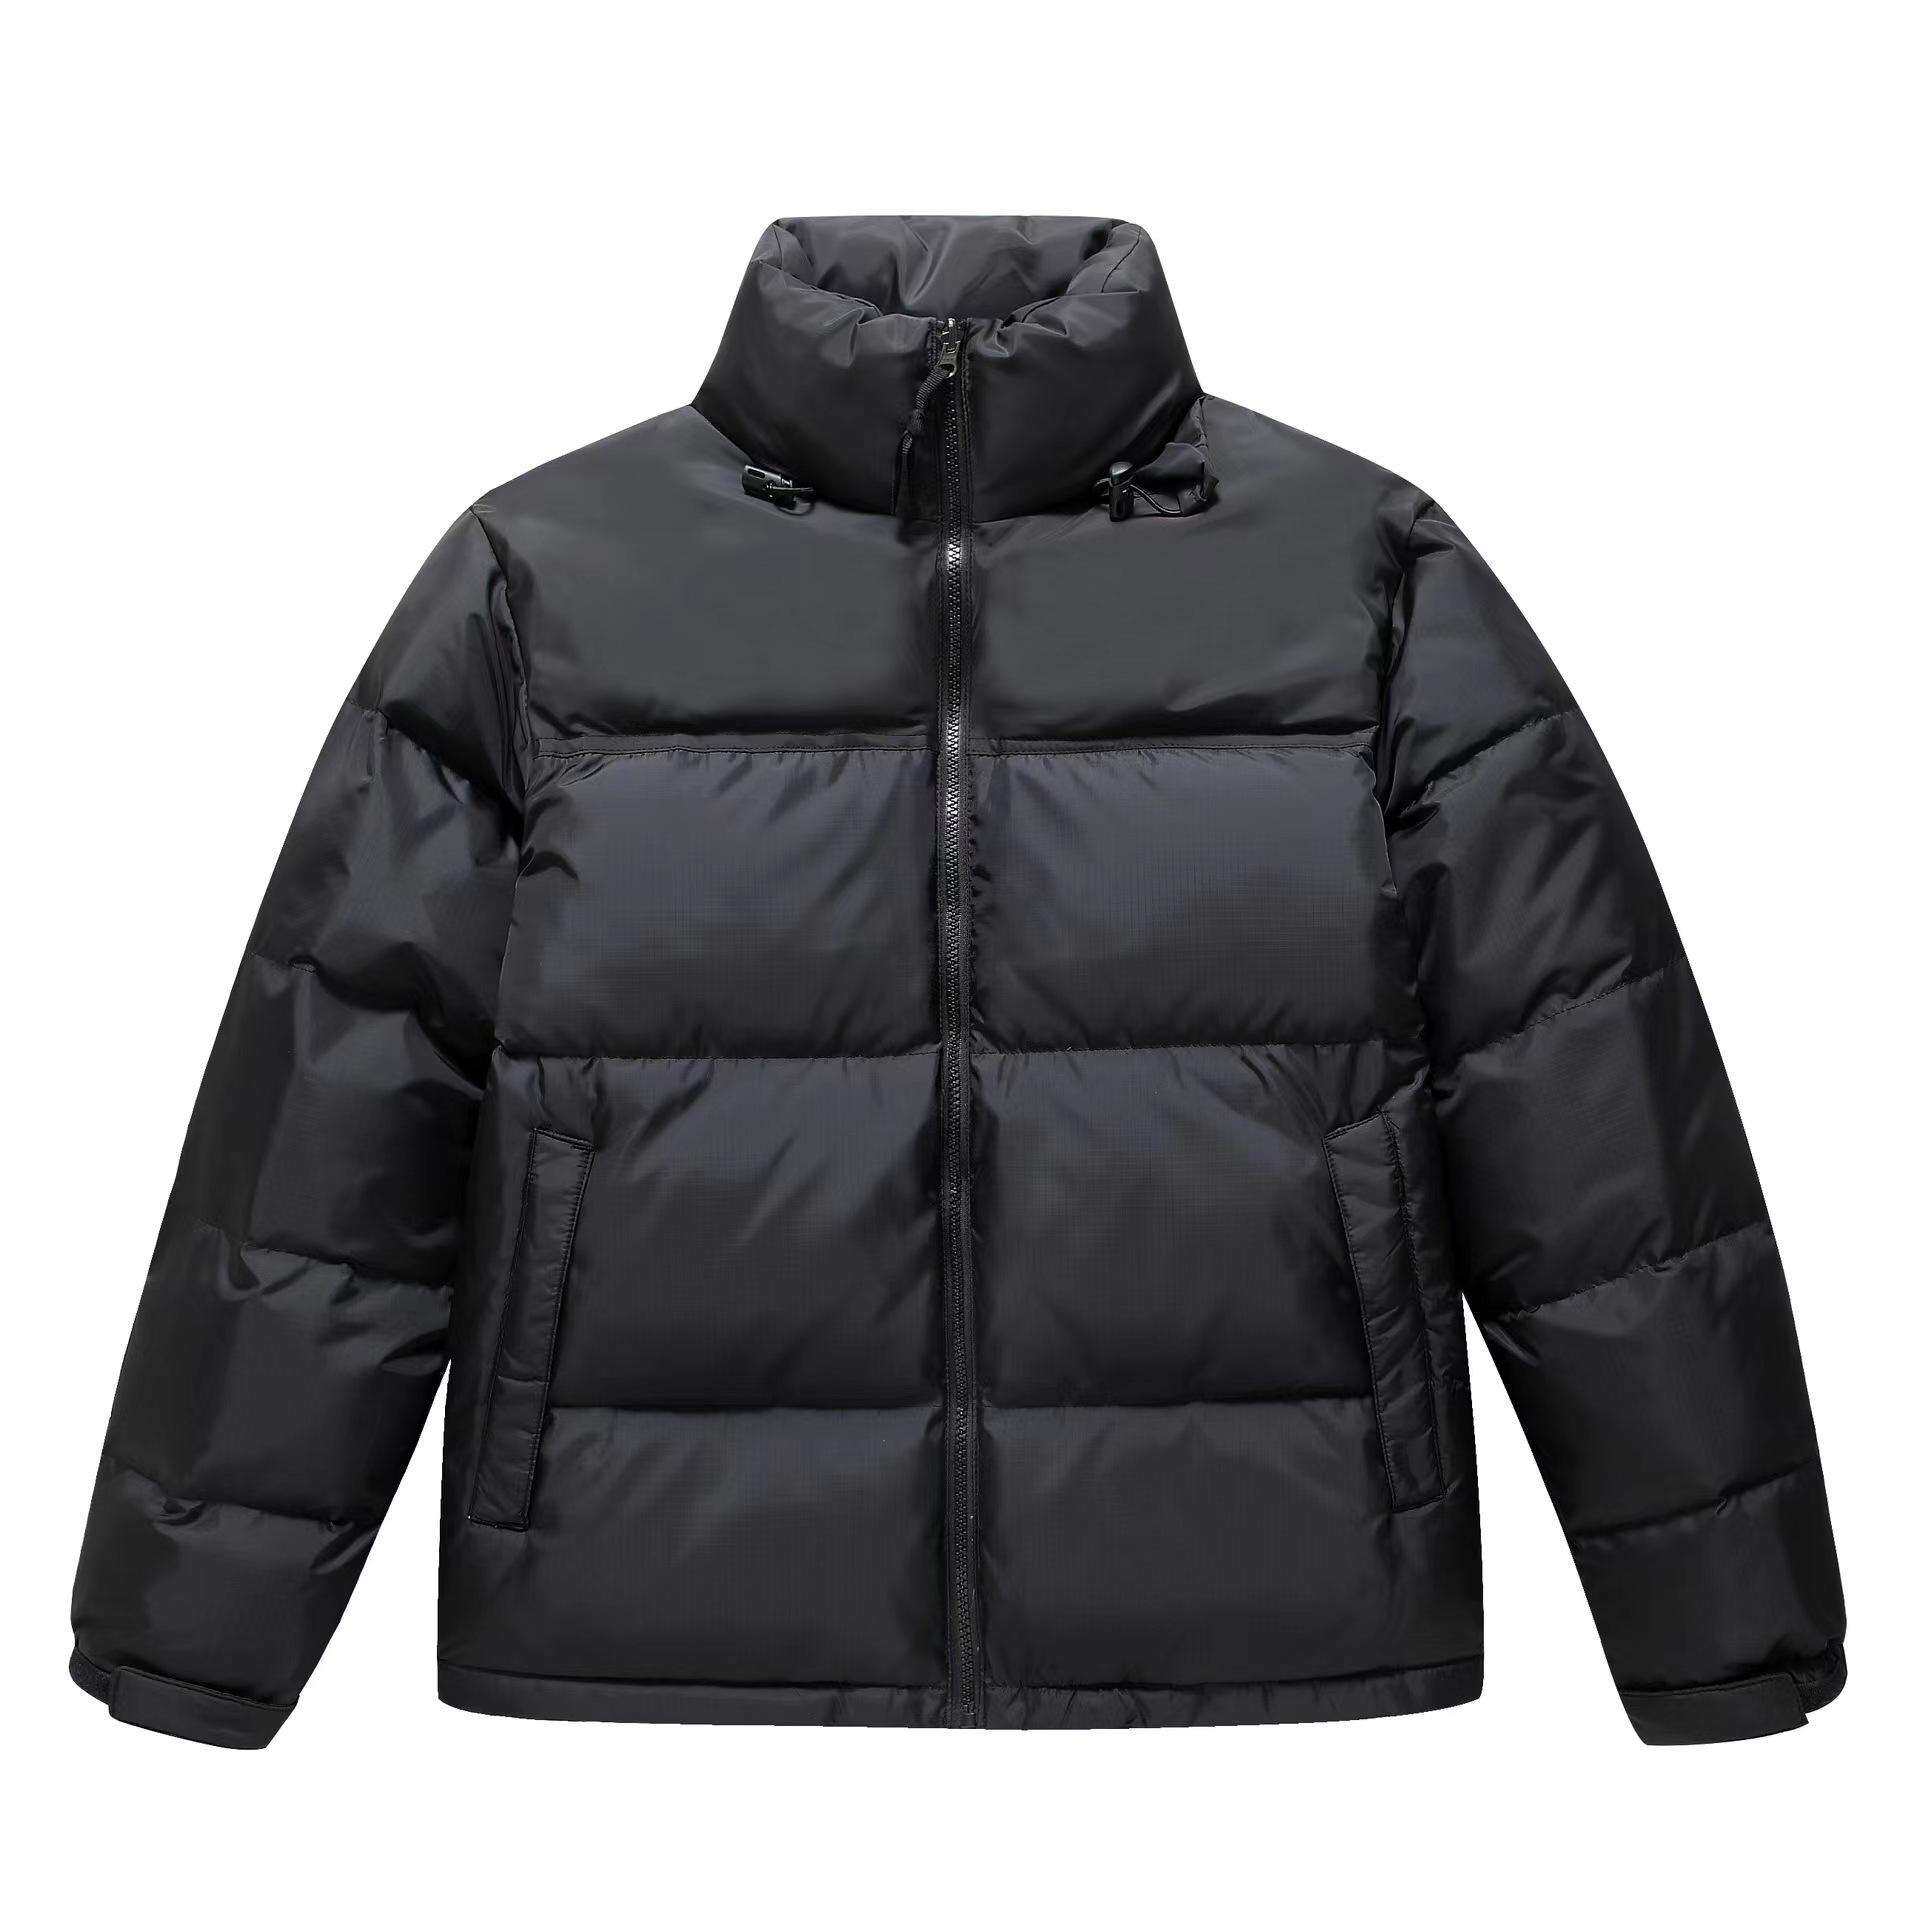 Jacket, Puffer Jacket, 80% Duck Down Filling, Contrasting Colors, Drawstring Zipper